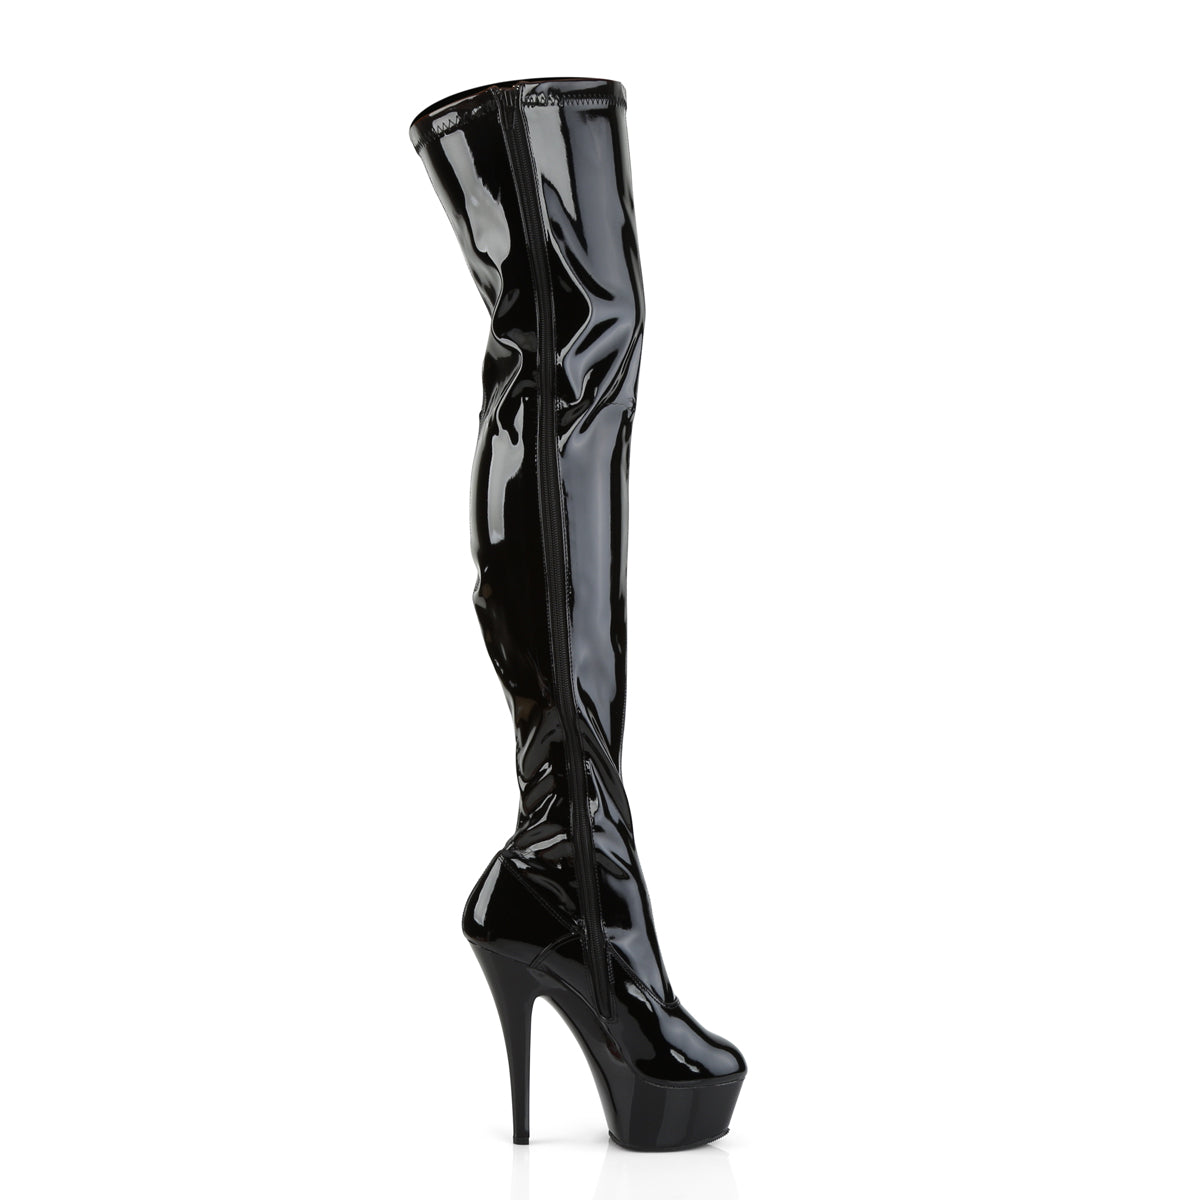 KISS-3000 Black Stretch Patent Thigh Boot Pleaser